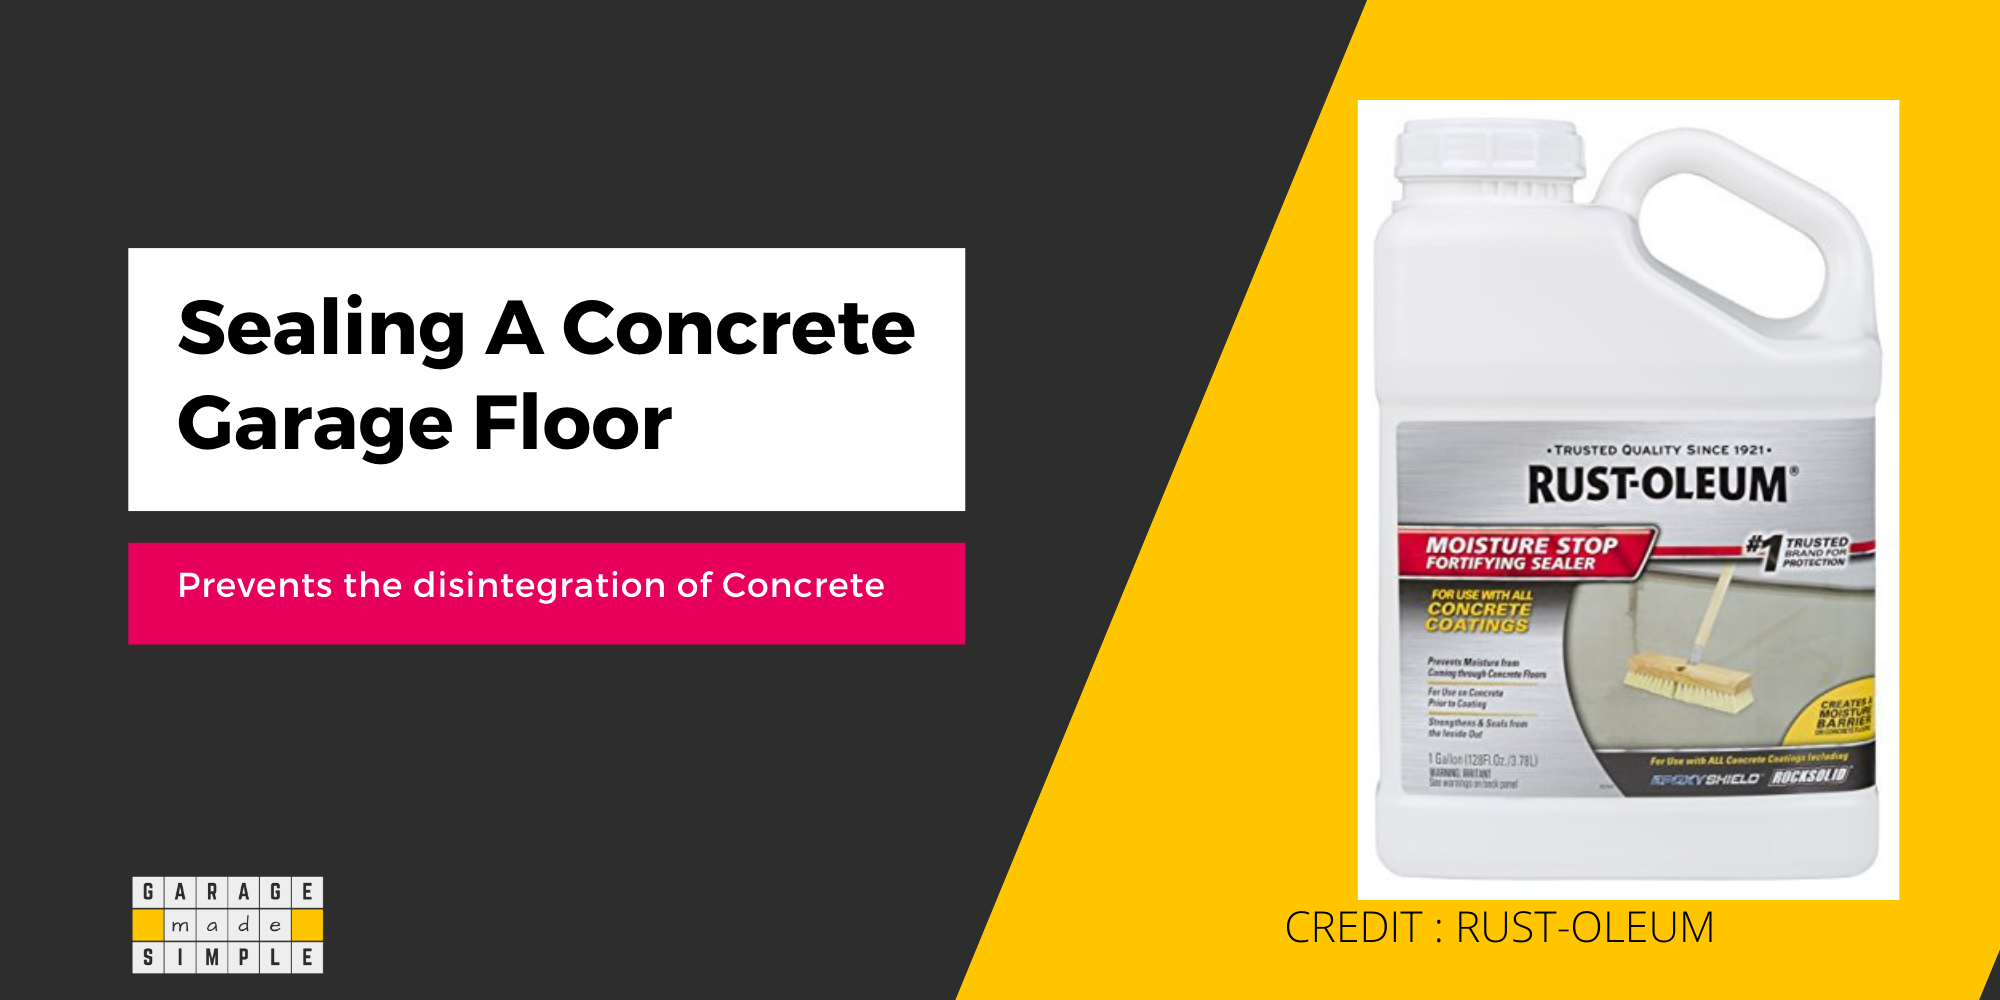 How To Know When Is The Best Time For Sealing A Concrete Garage Floor?